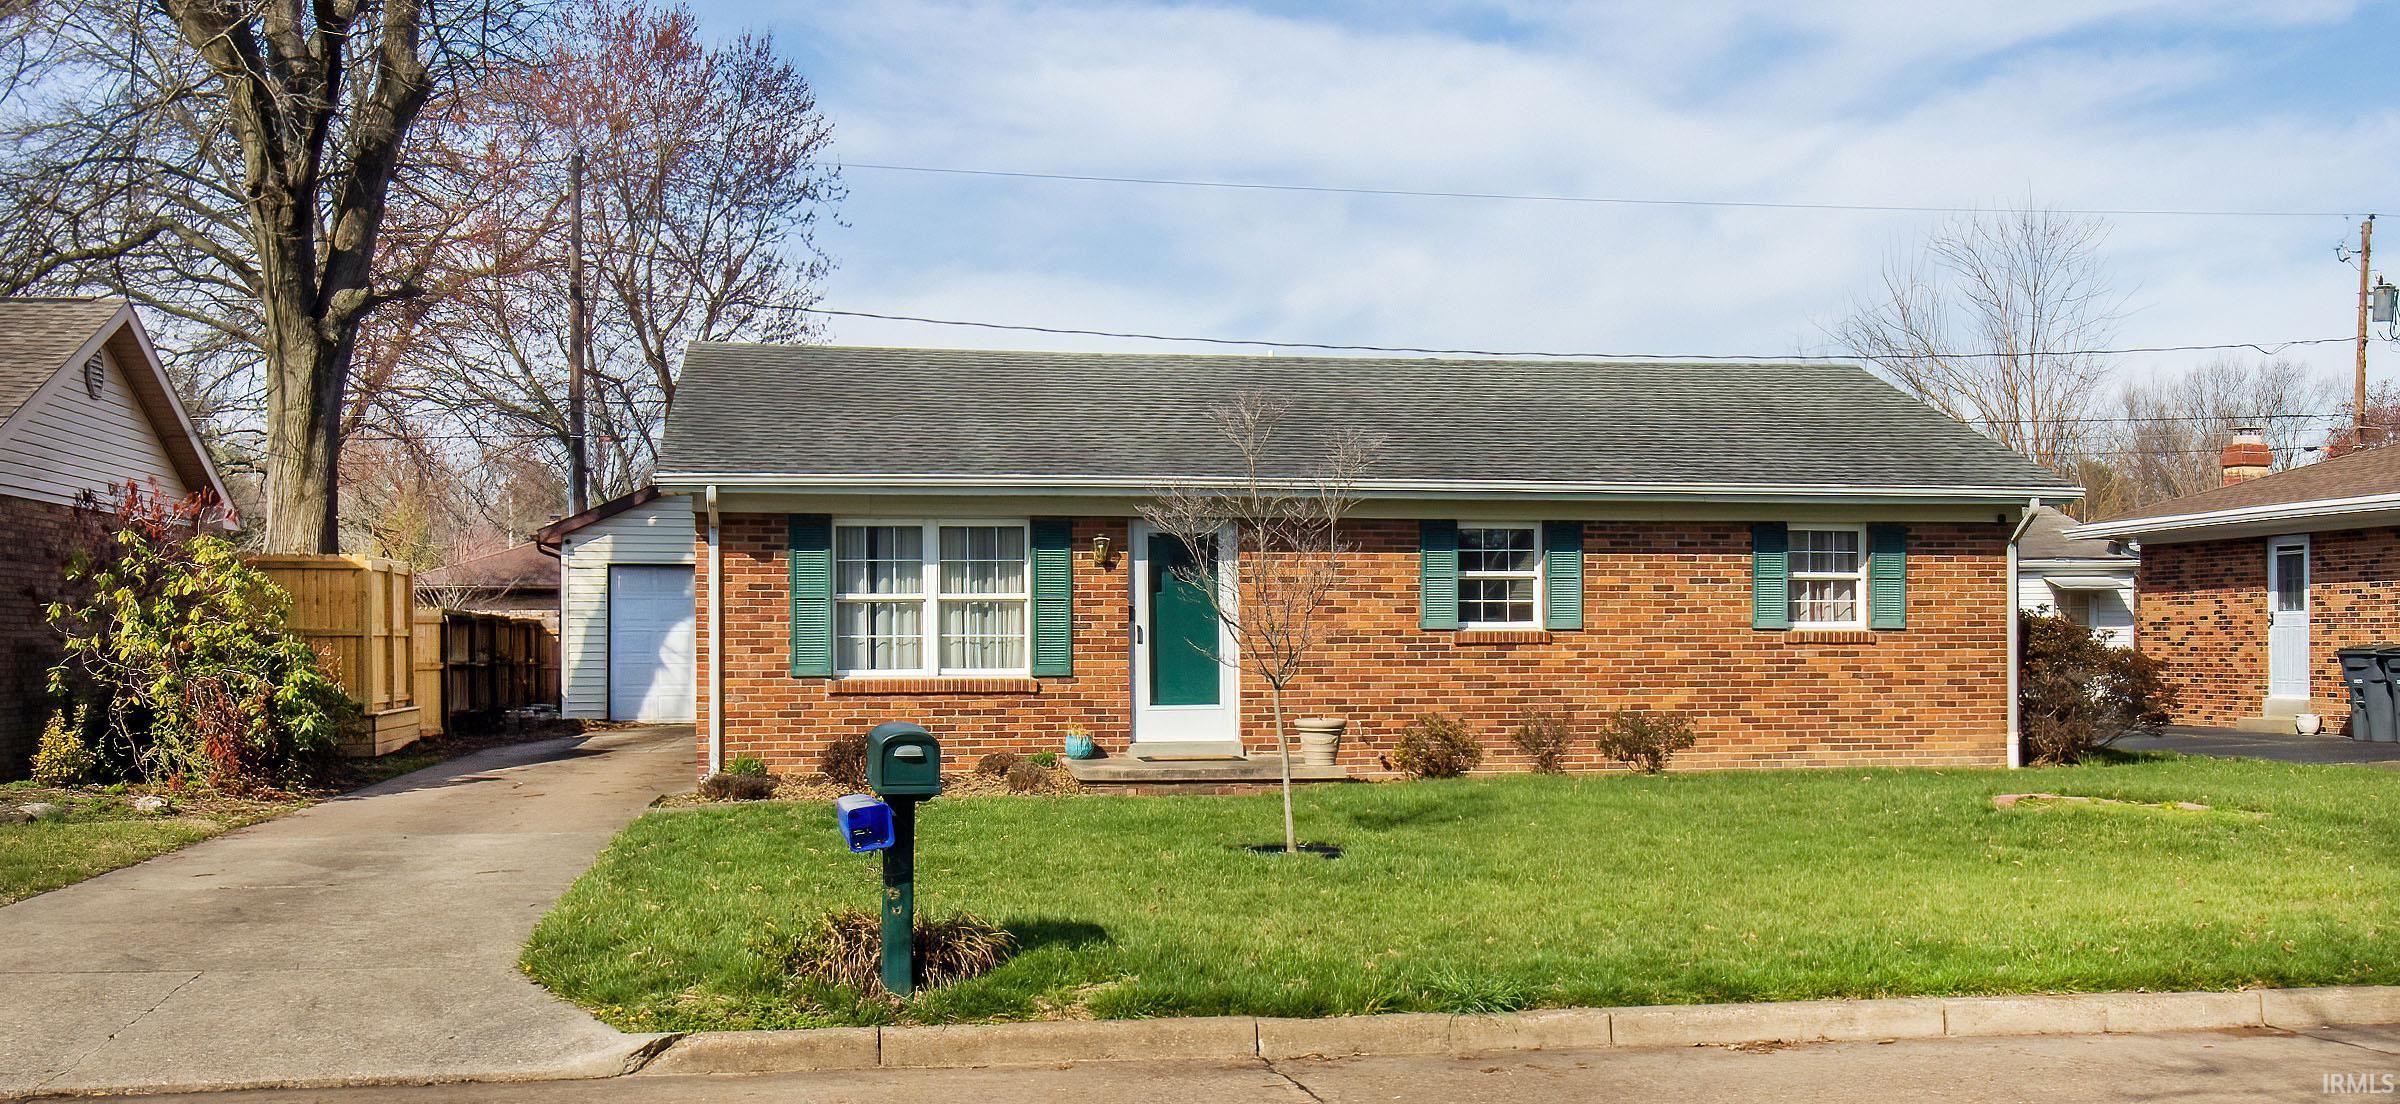 1824 N Colony Drive, Evansville, IN 